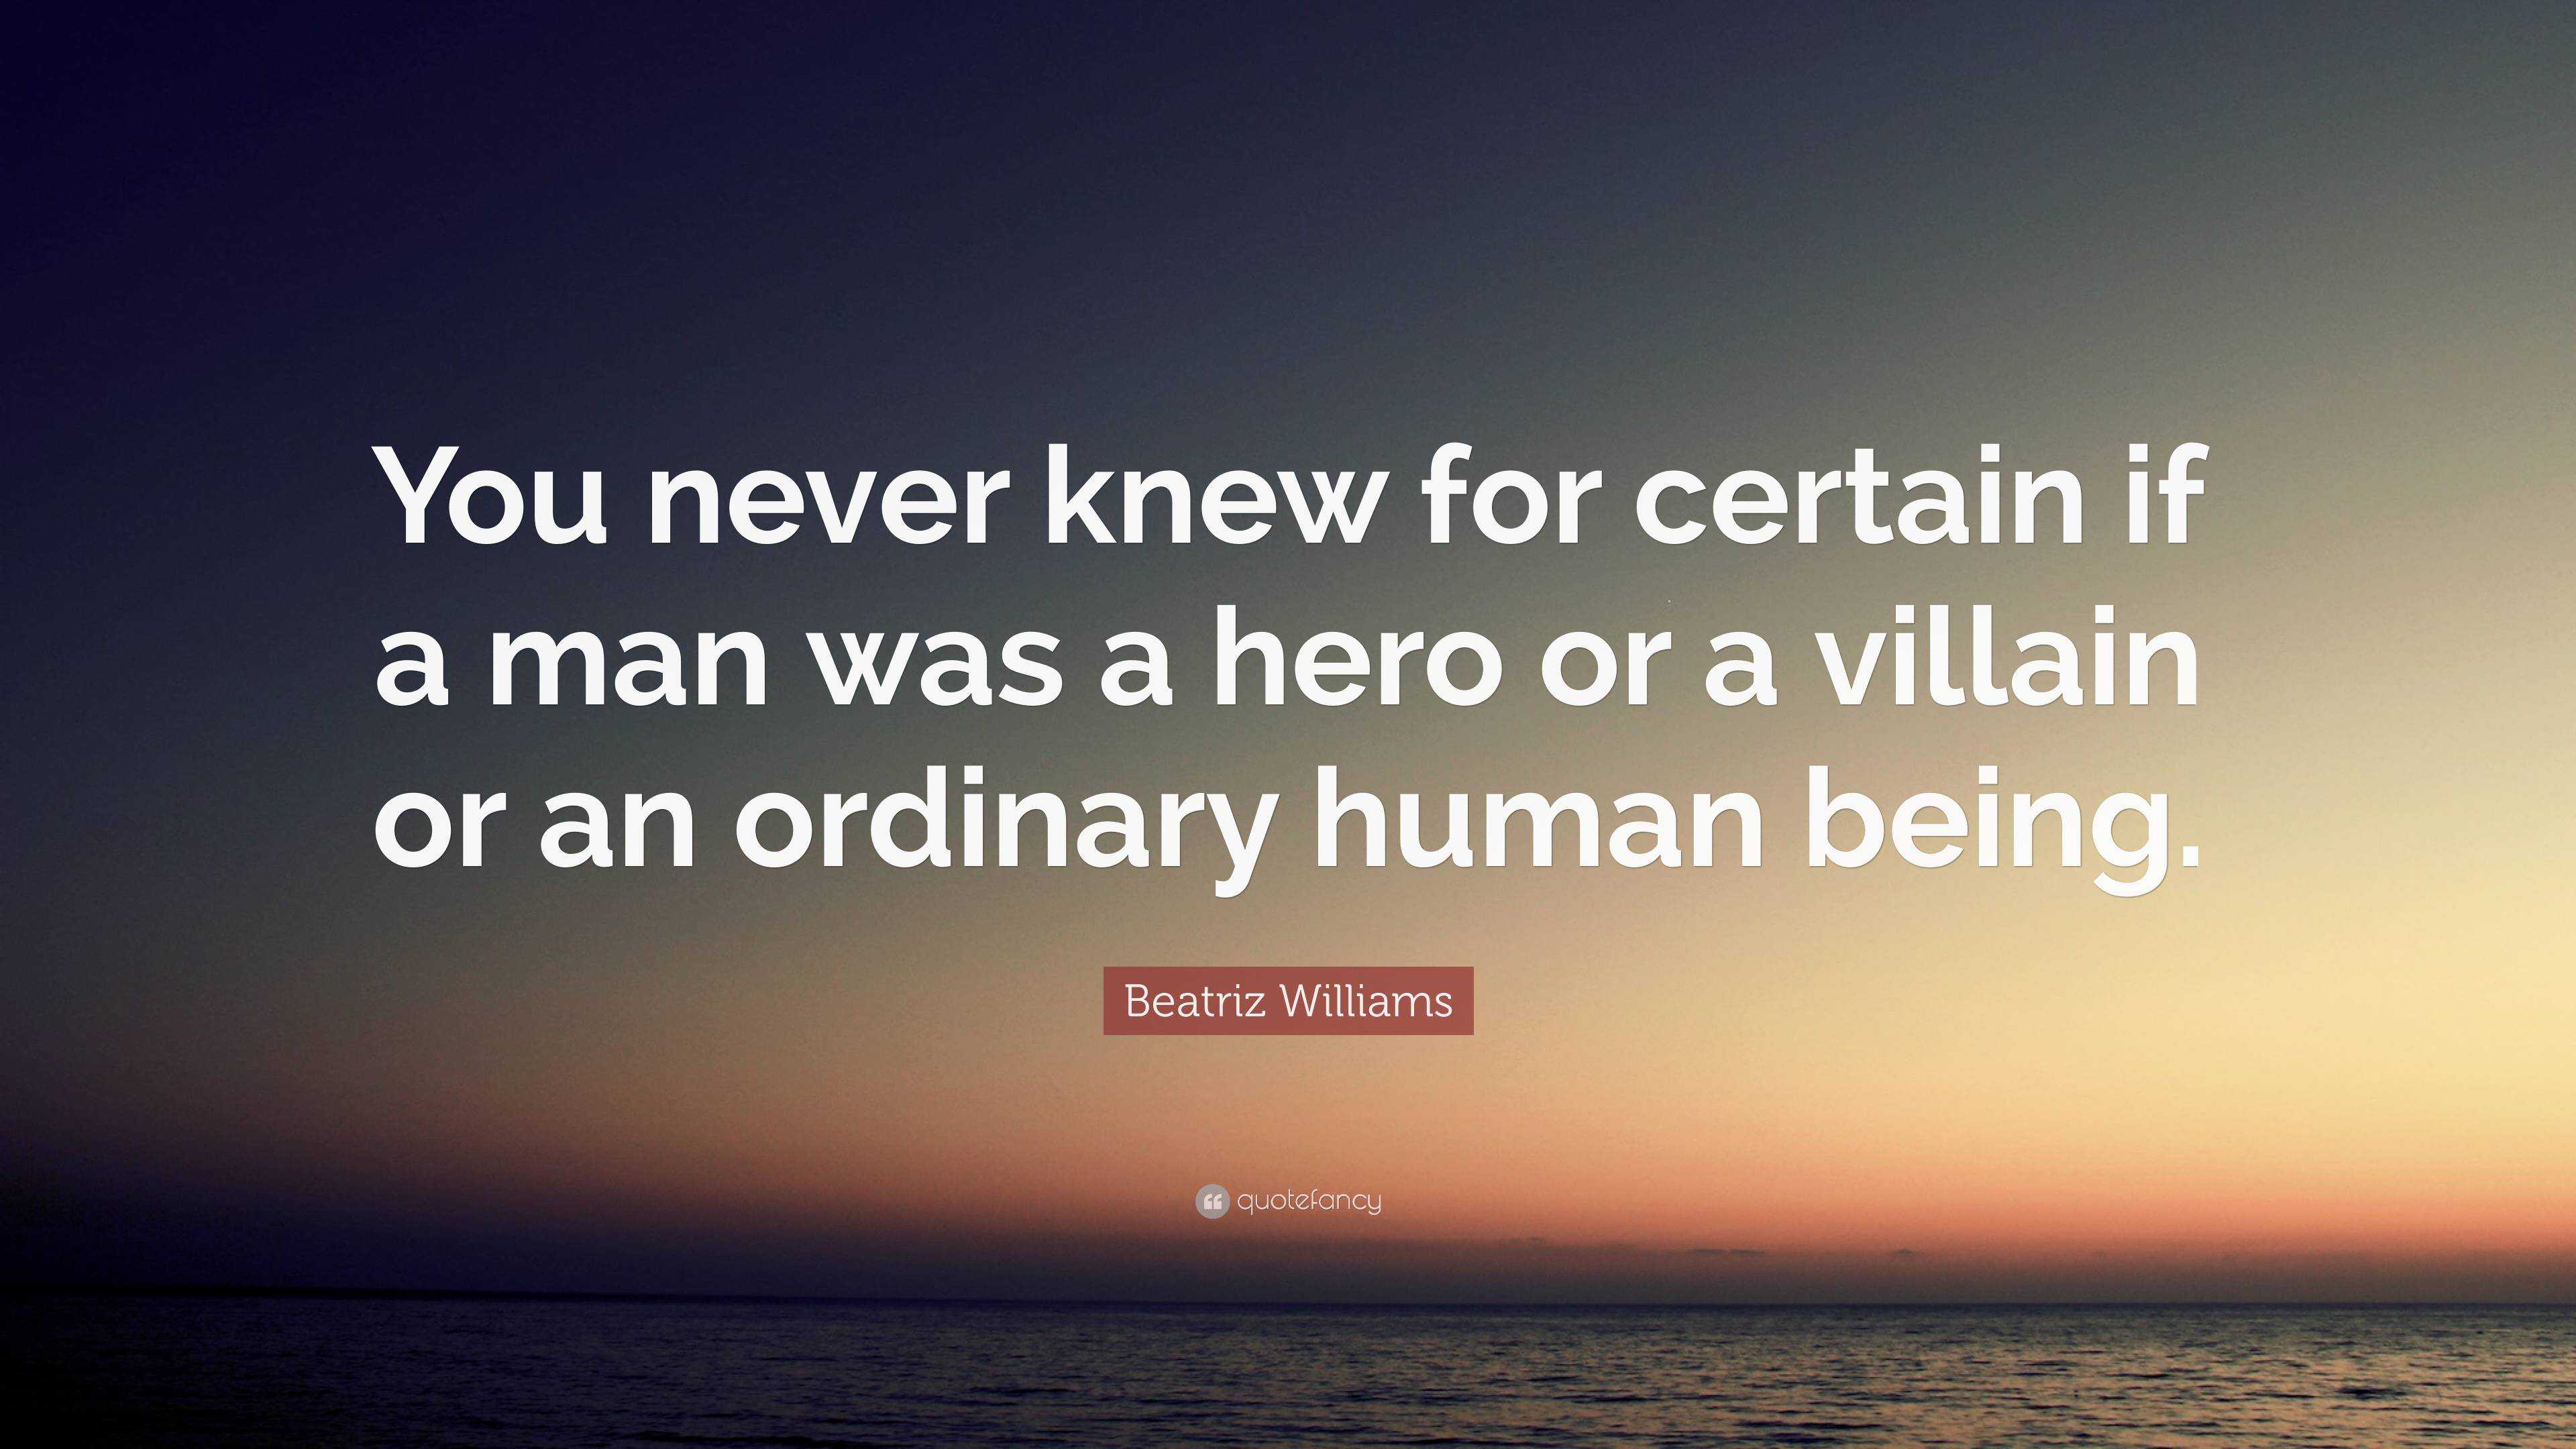 Beatriz Williams Quote: “You never knew for certain if a man was a hero ...